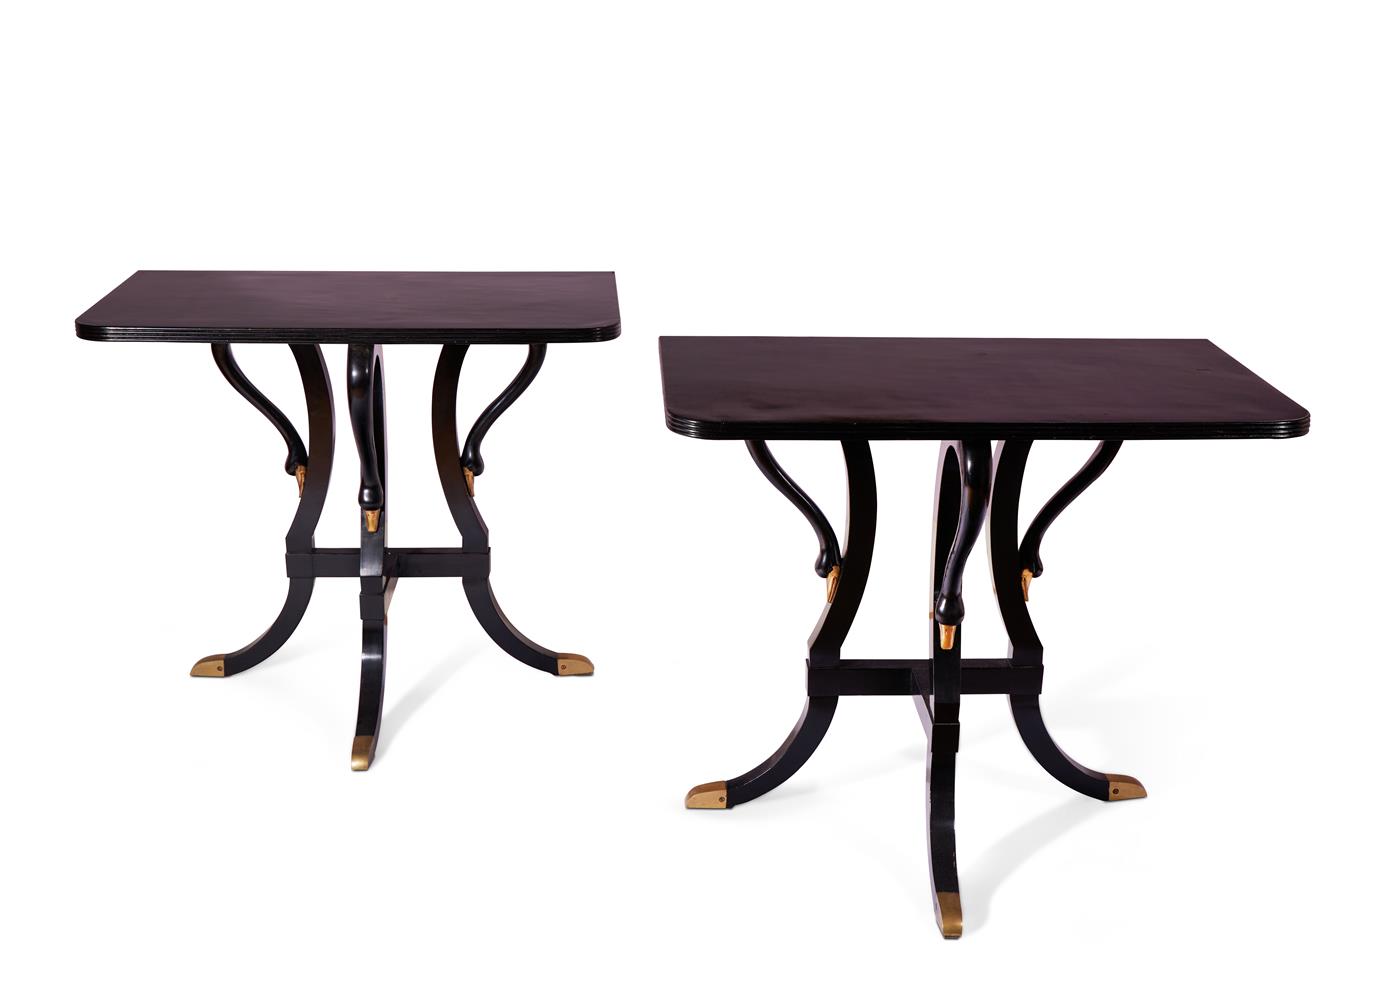 A PAIR OF BRONZE MOUNTED EBONISED CONSOLE TABLES ITALIAN, MID 20TH CENTURY